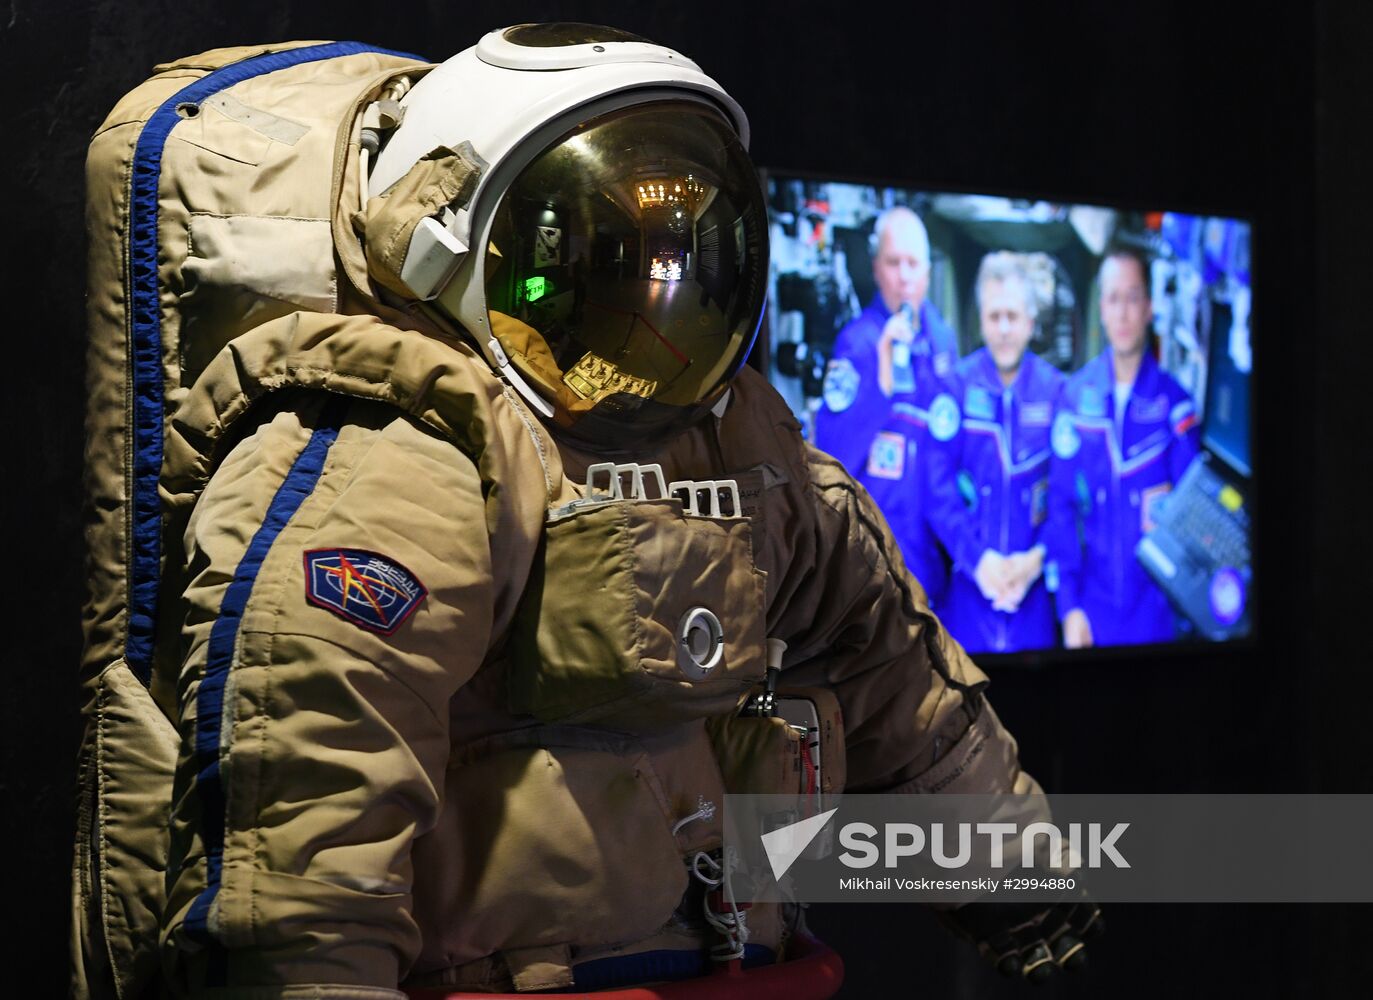 Multimedia exhibition "Space. Love" opens in Moscow